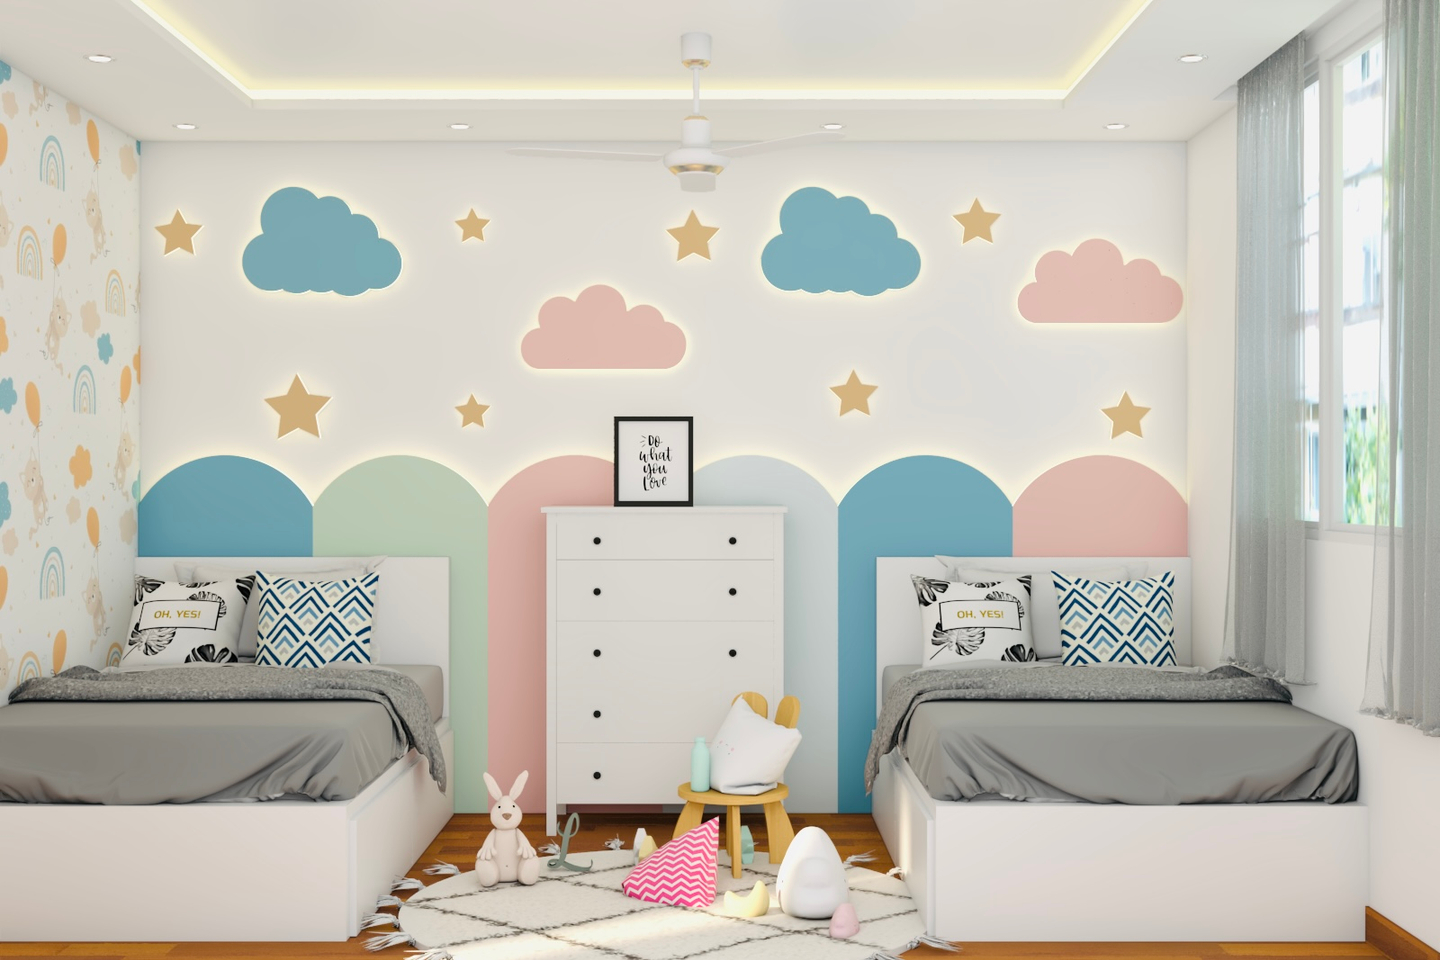 Kids' Room With Two Beds - Livspace